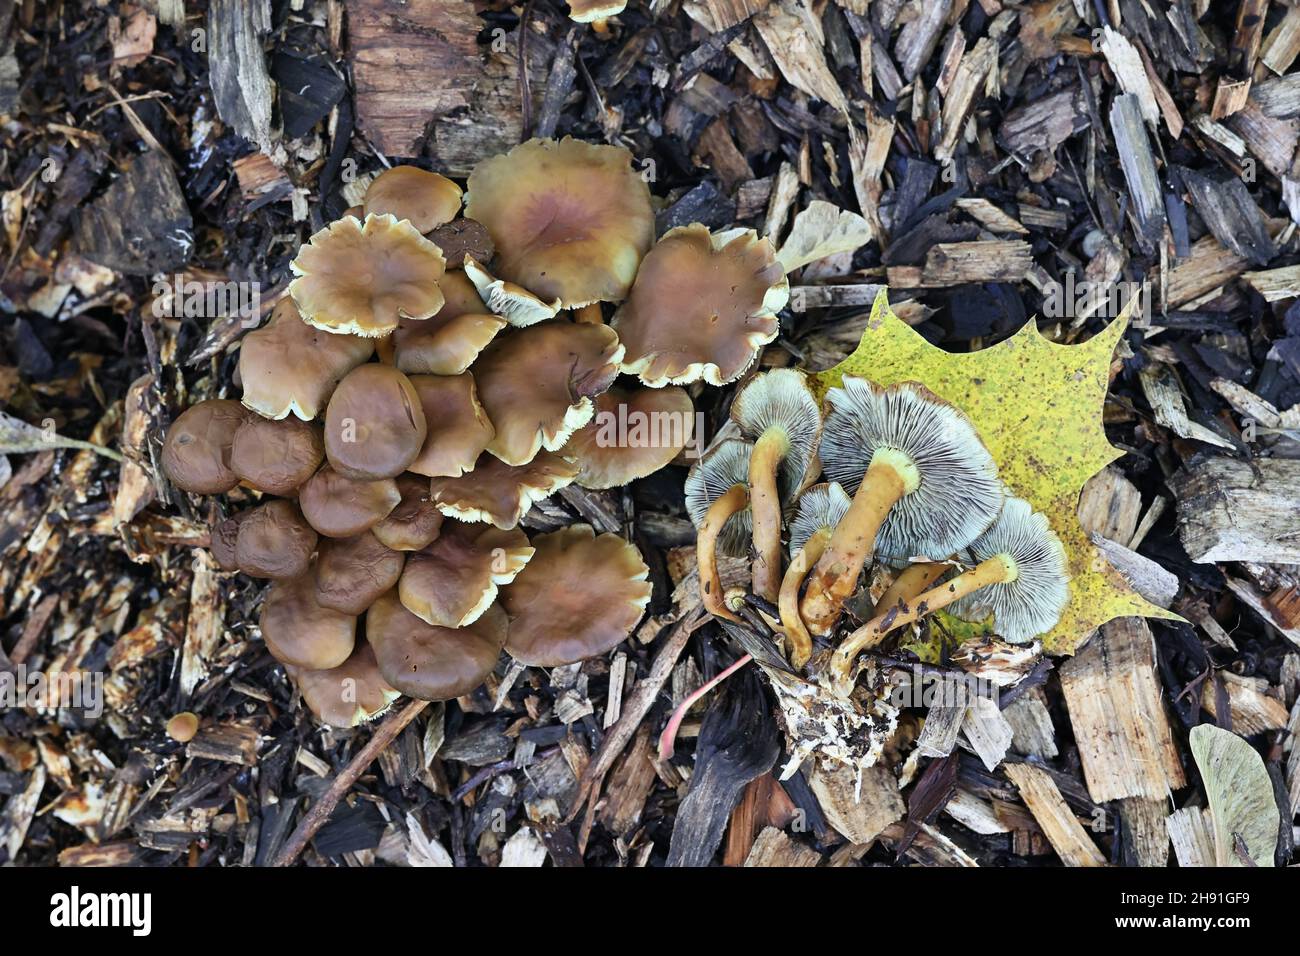 Hypholoma fasciculare, known as sulphur tuft, sulfur tuft or clustered woodlover, wild mushroom from Finland Stock Photo